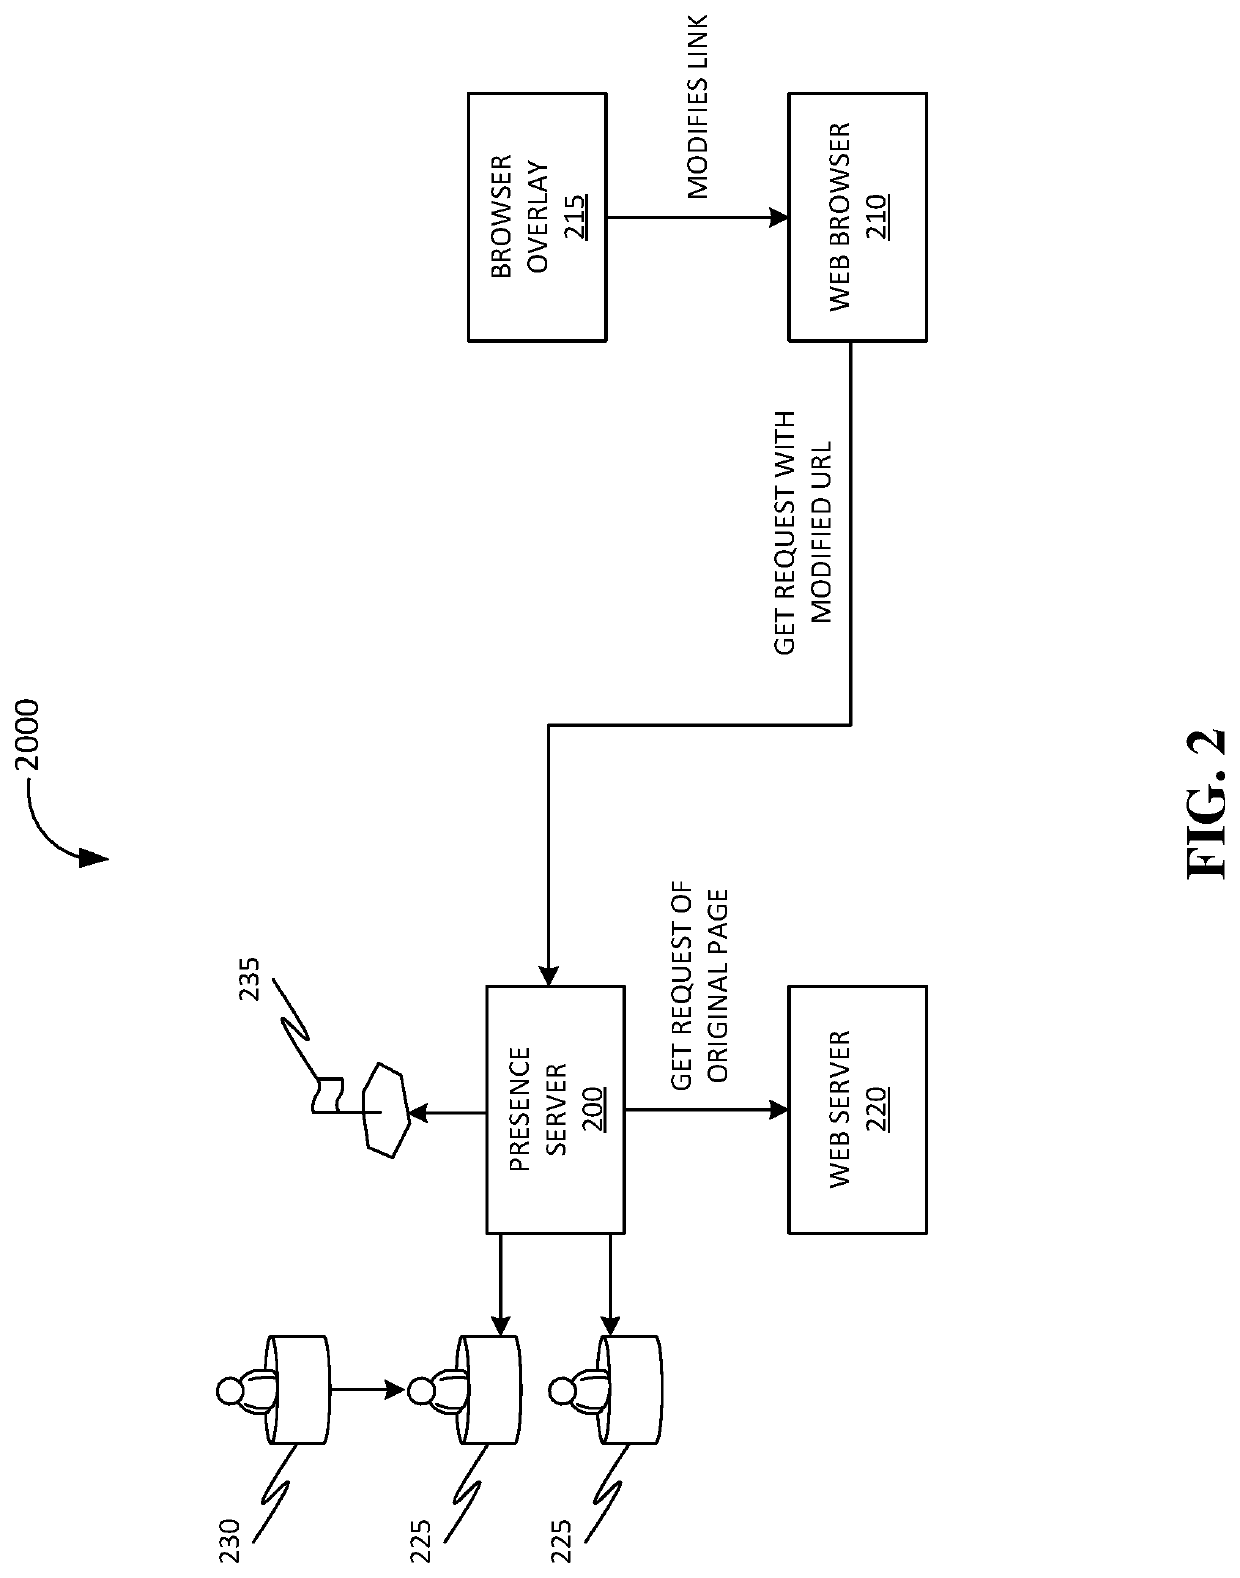 Methods, systems, apparatuses, and devices for facilitating interaction between users viewing same webpages and virtual locations